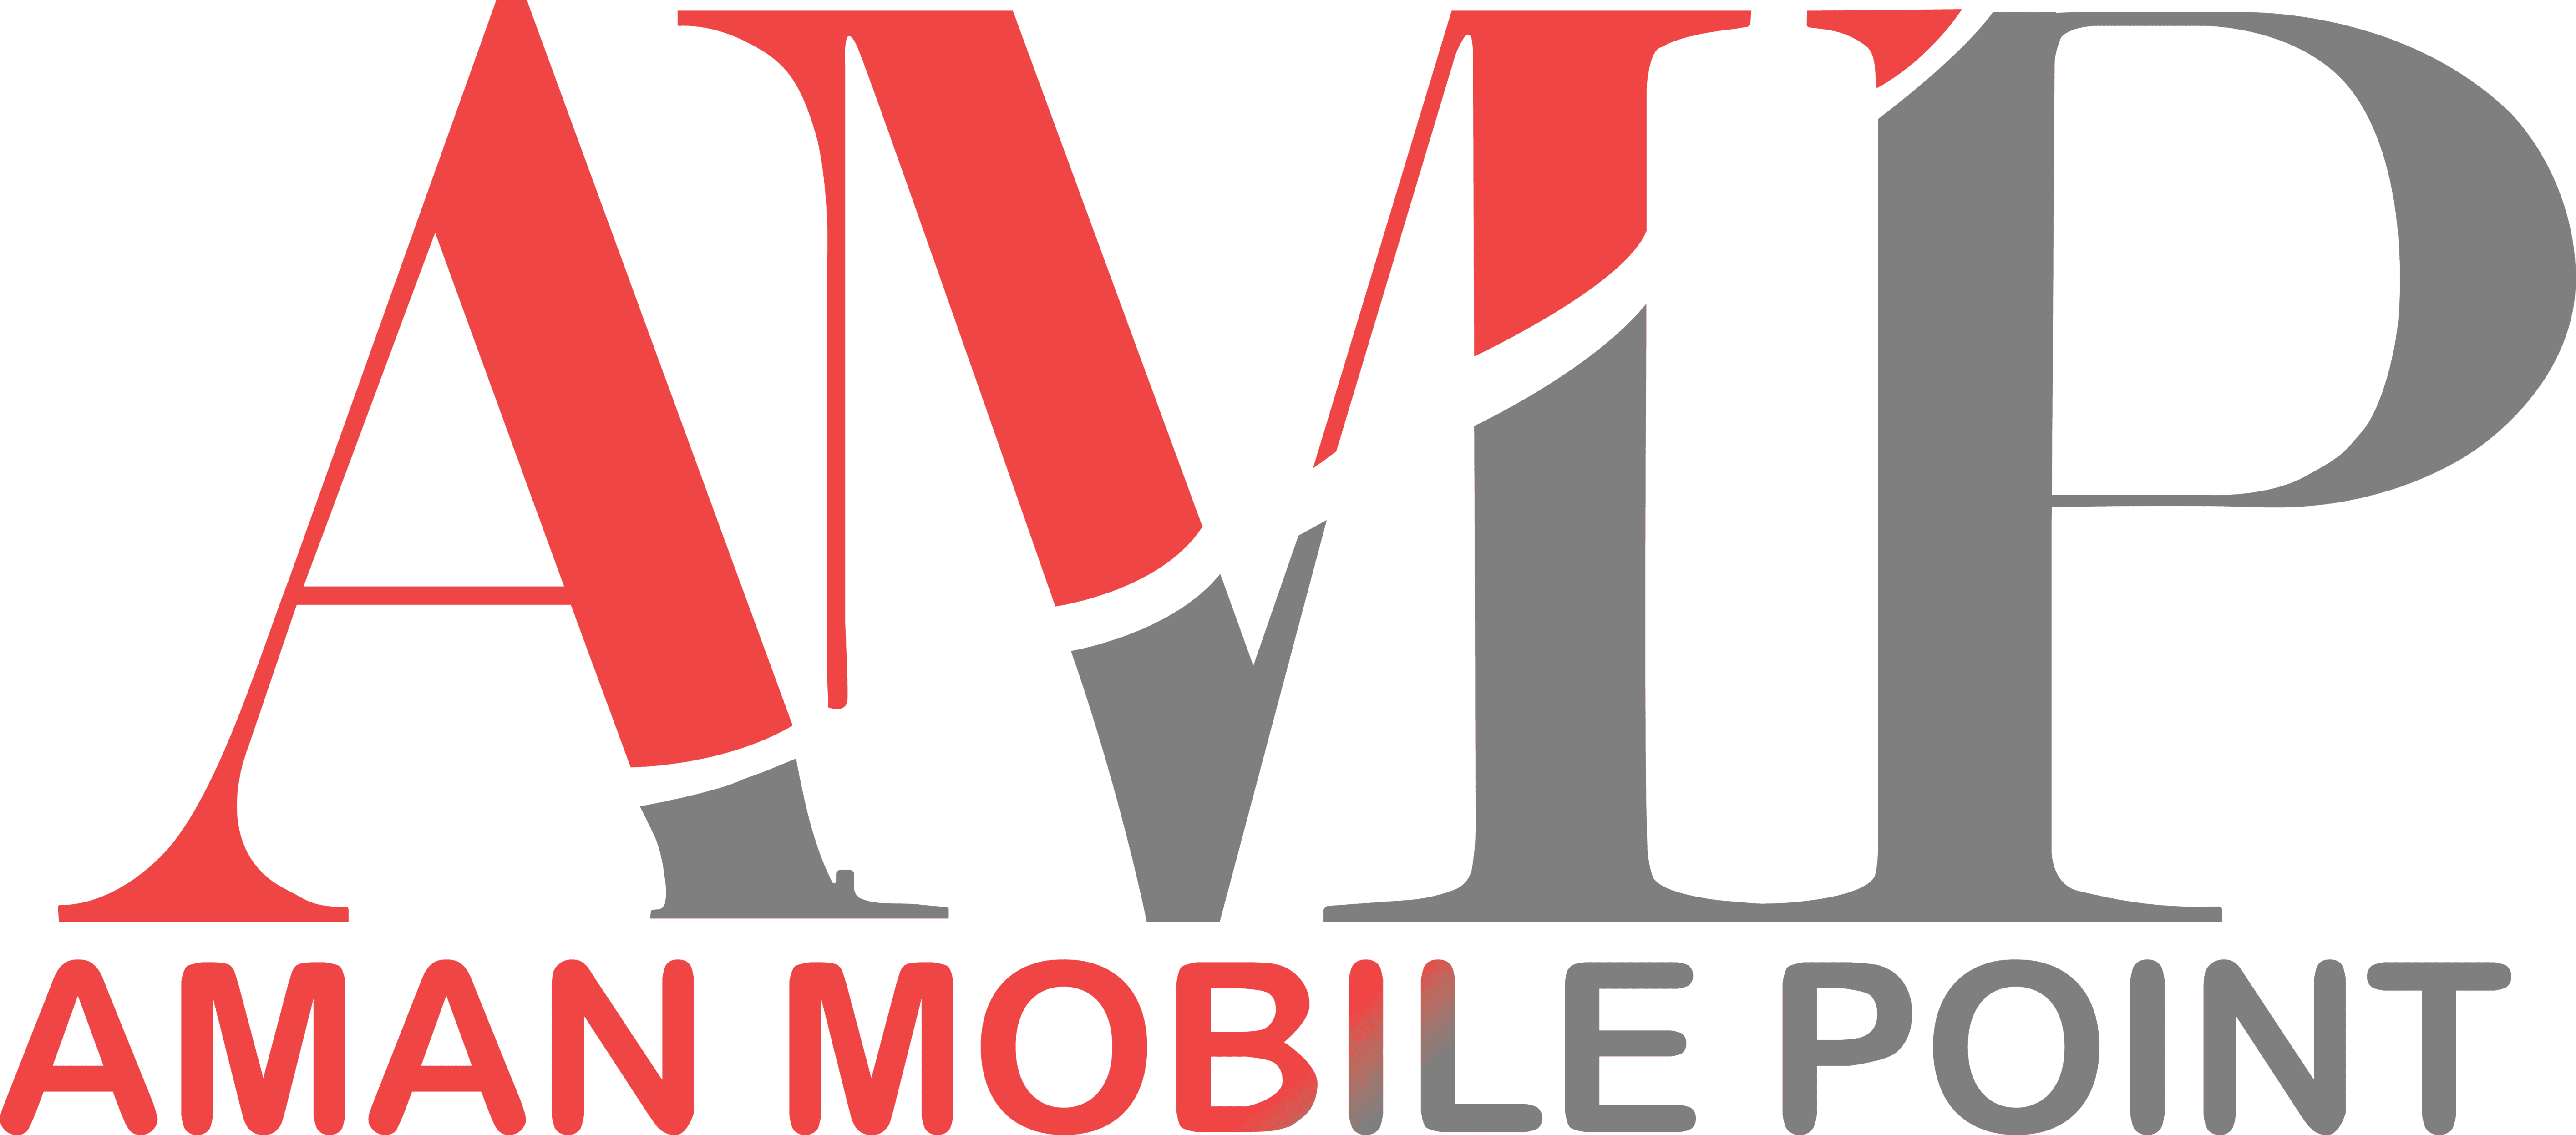 Aman Mobile Point